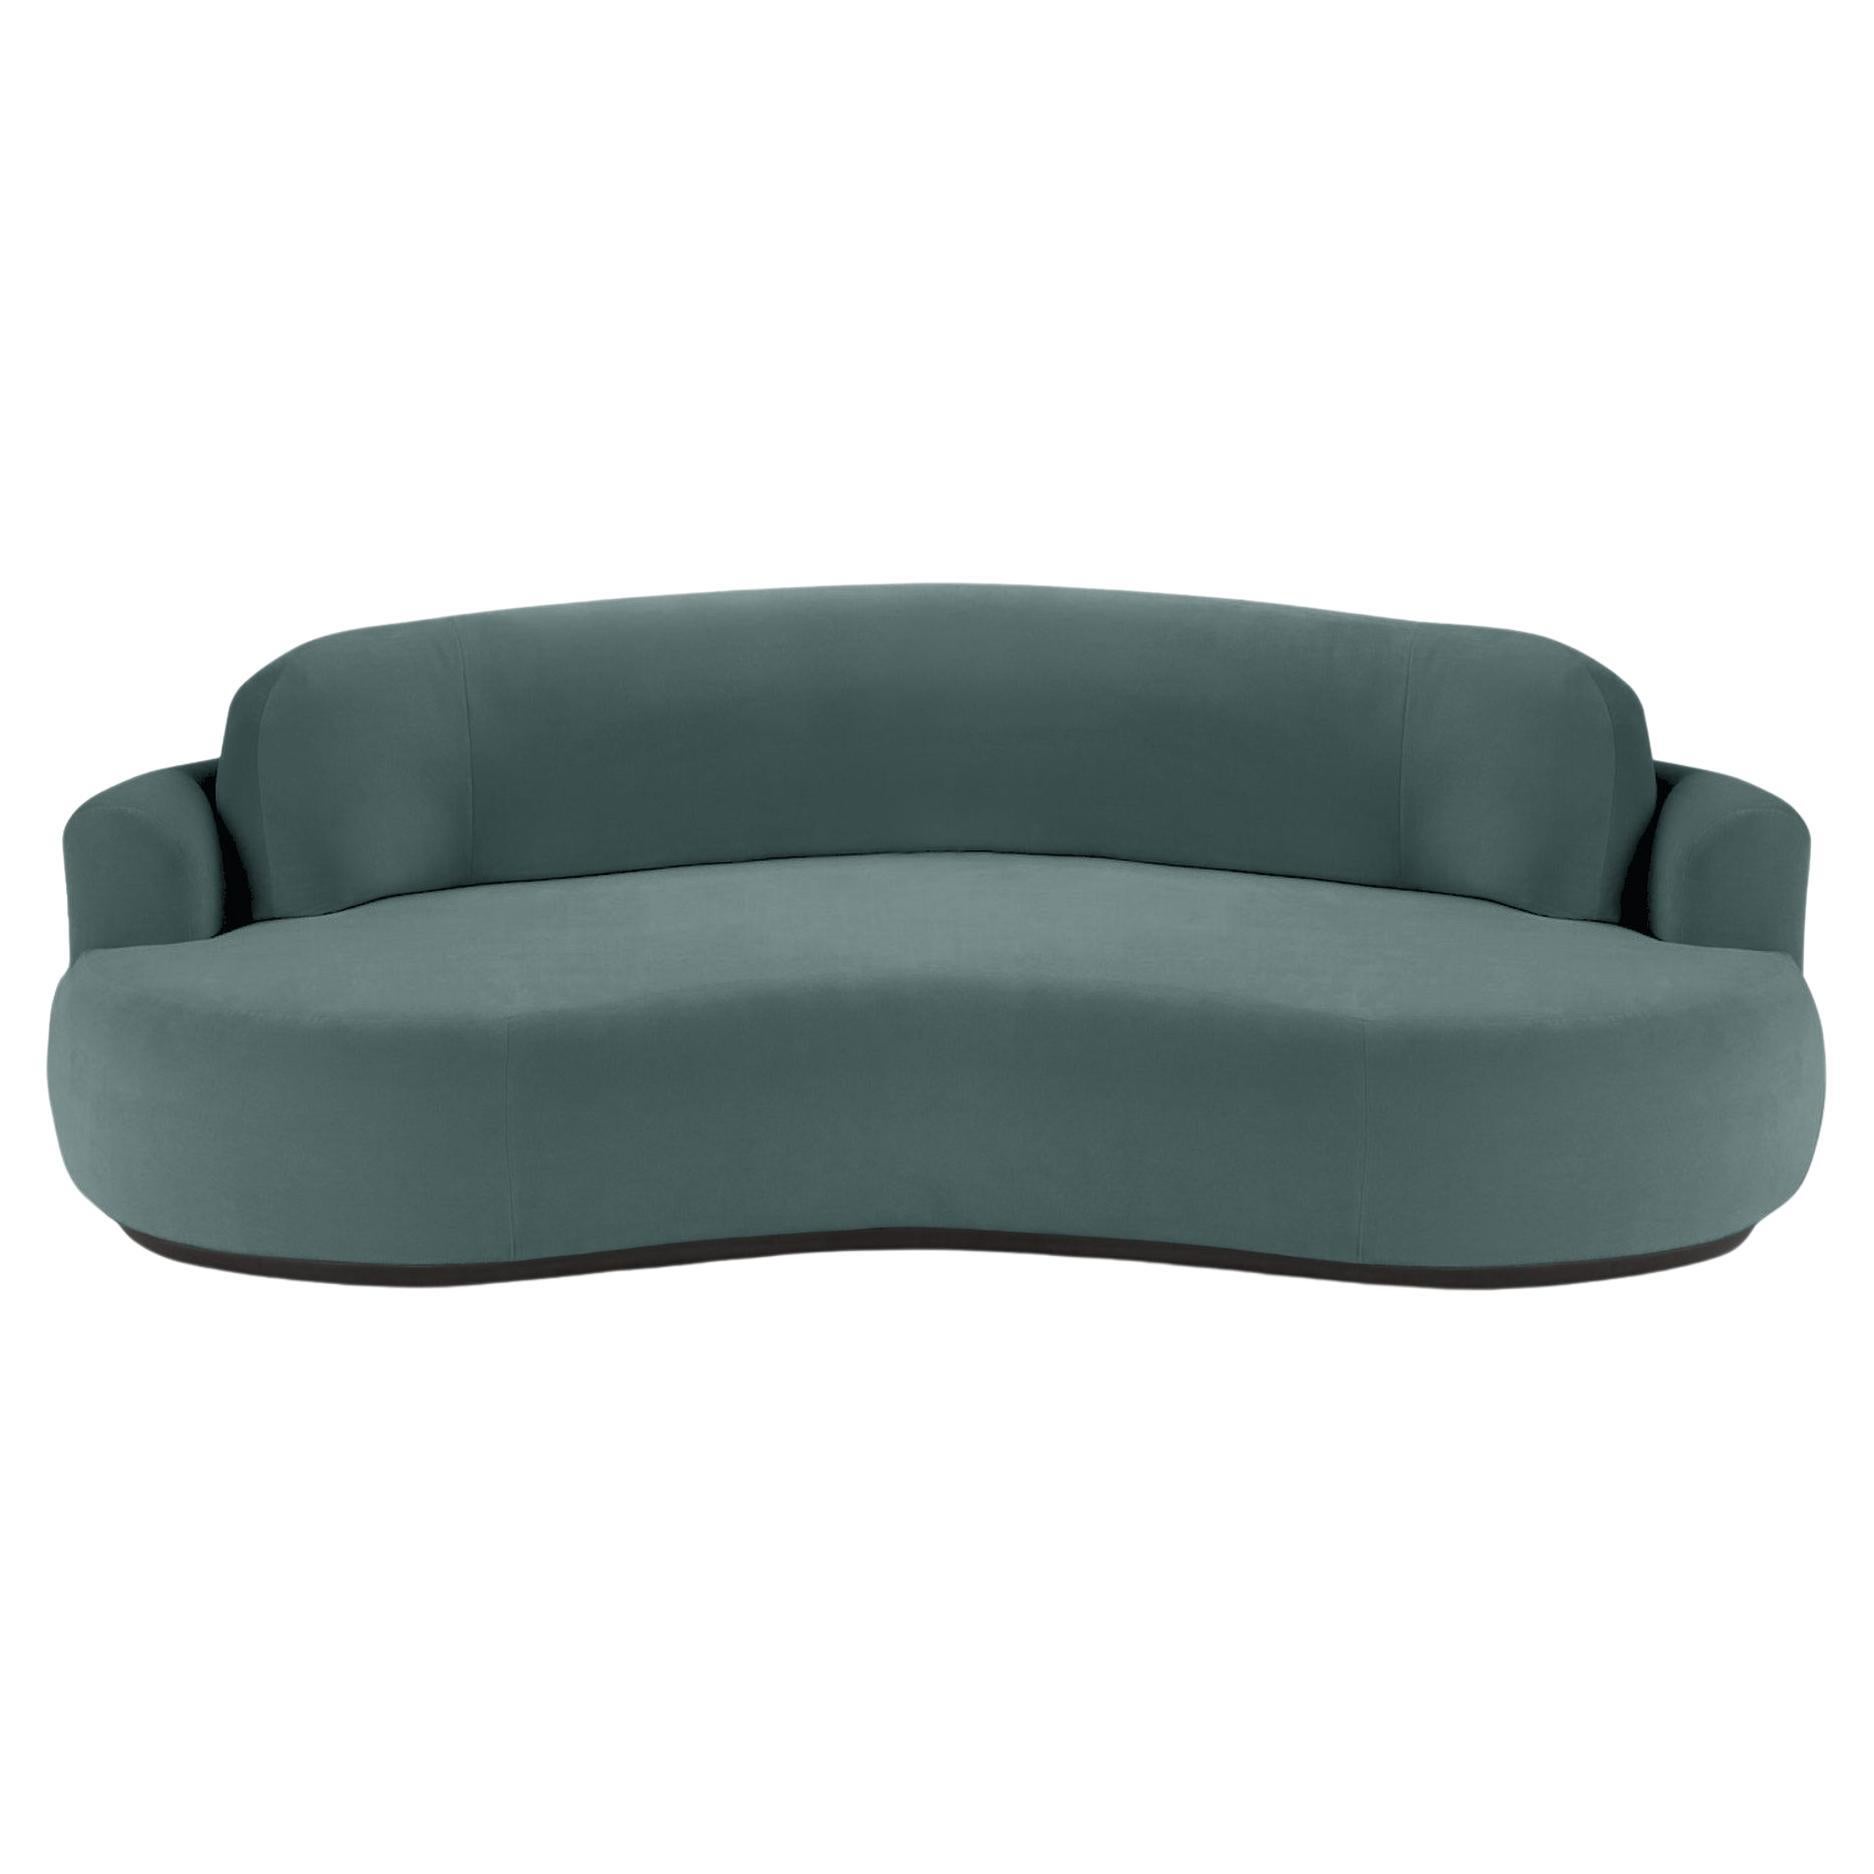 Naked Round Sofa, Medium with Beech Ash-056-5 and Teal For Sale